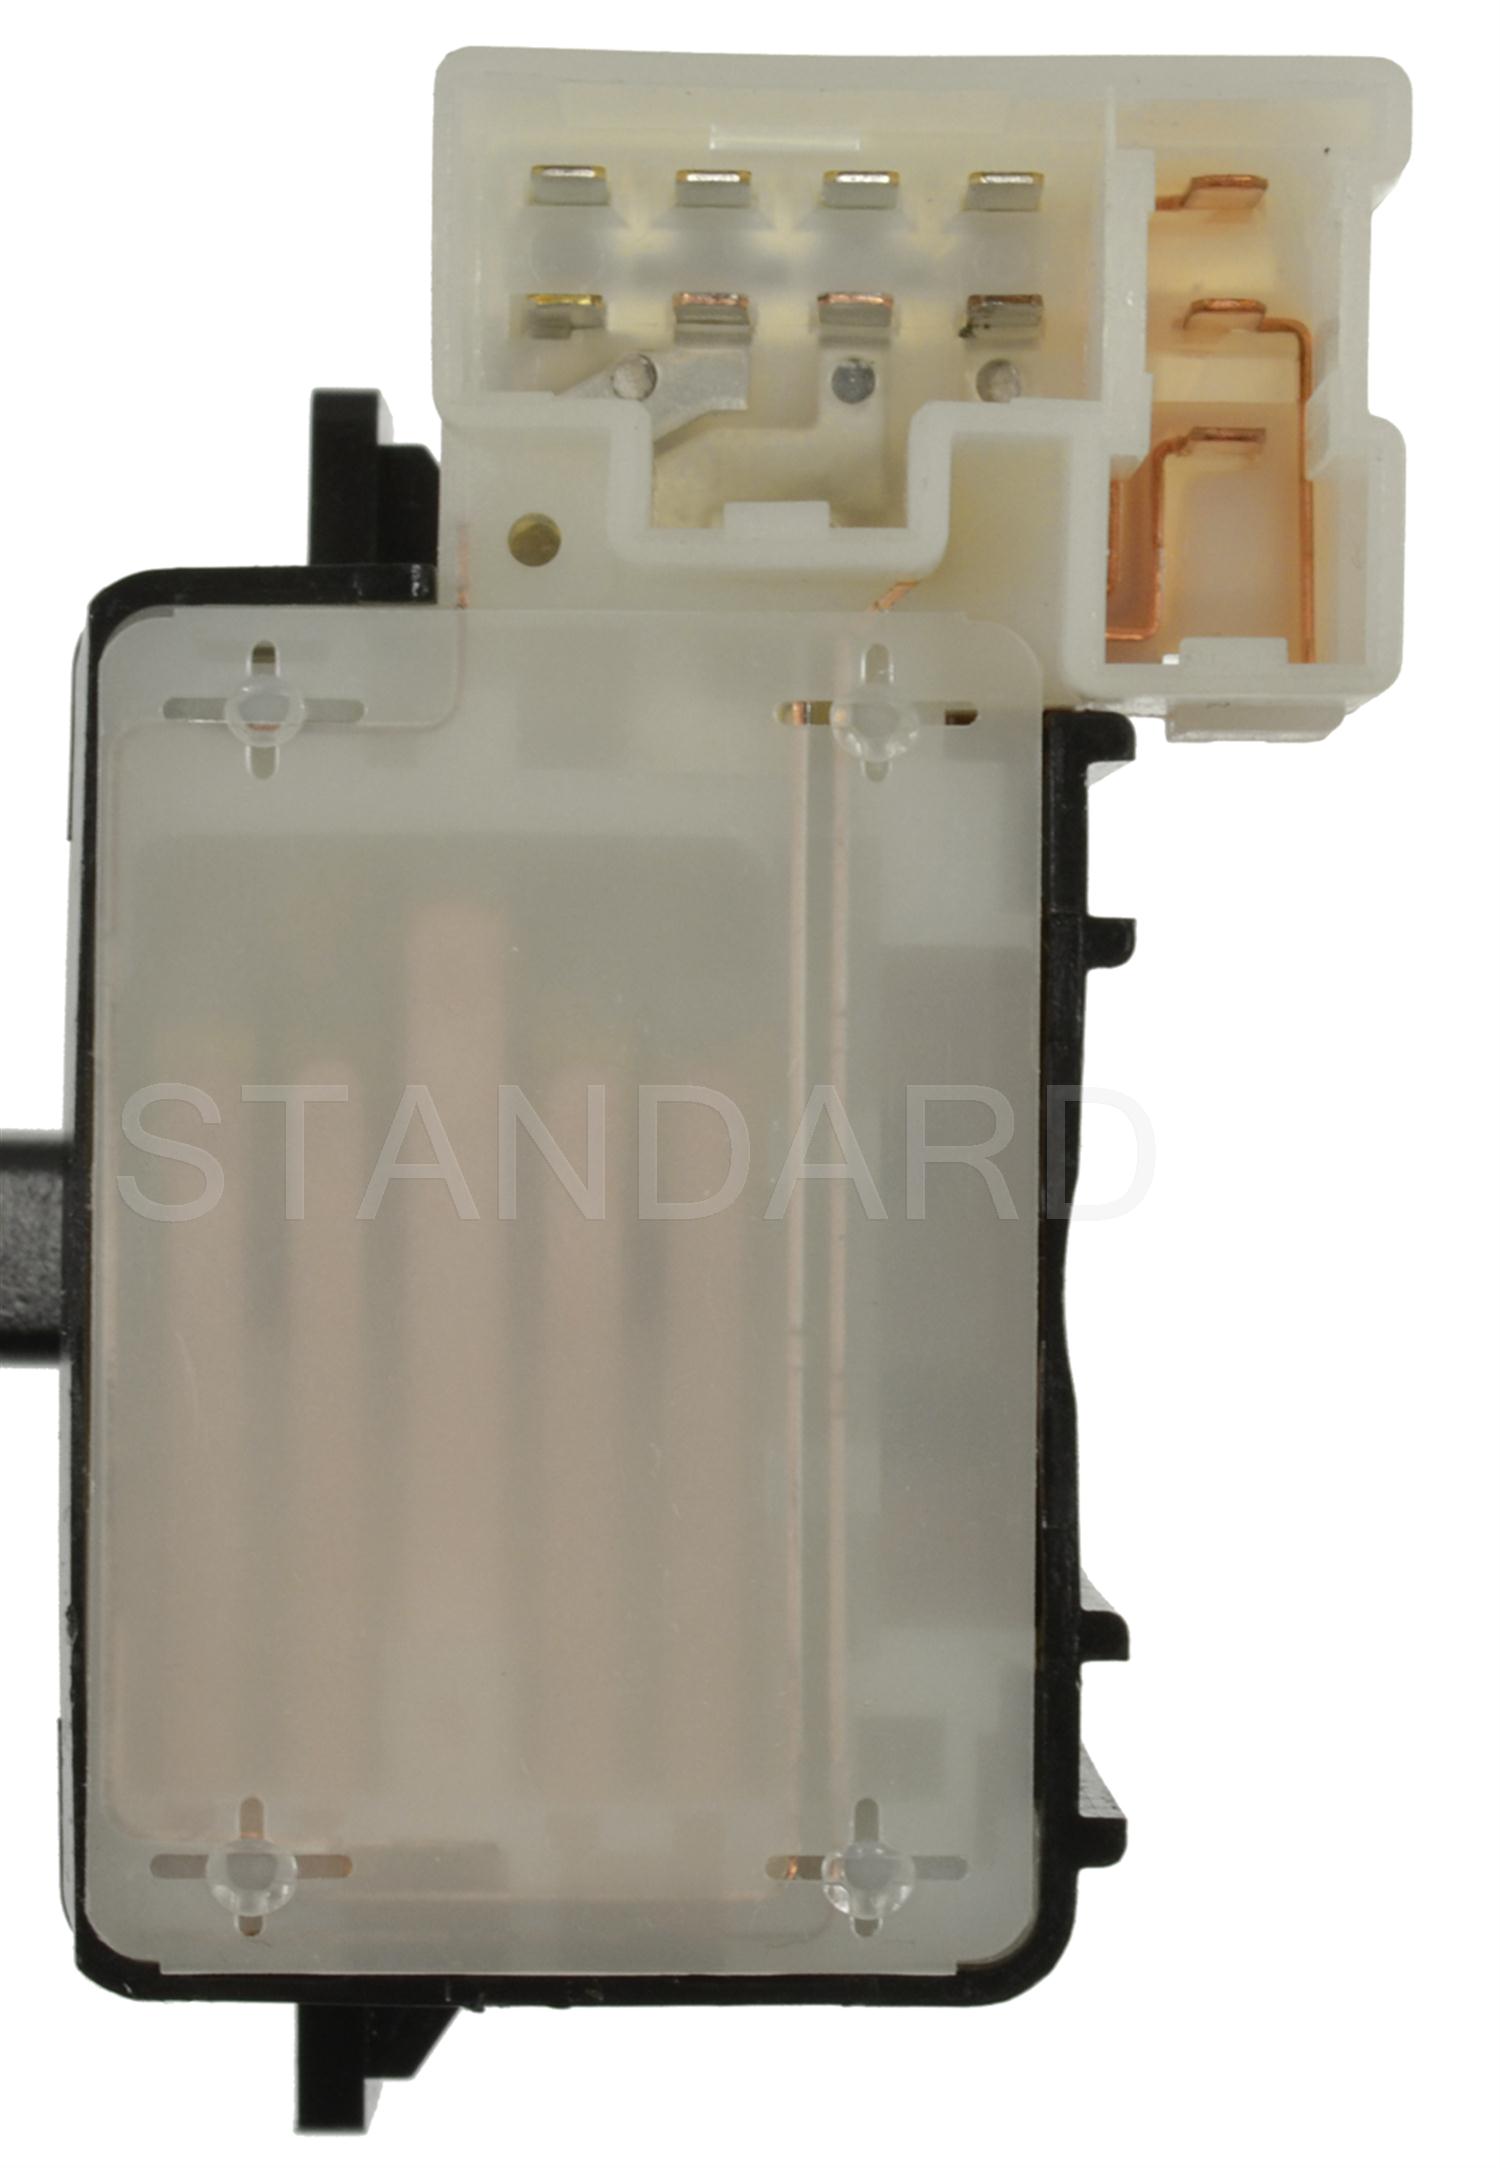 Picture of Standard Motor Products Cbs-2115 Combination Switch